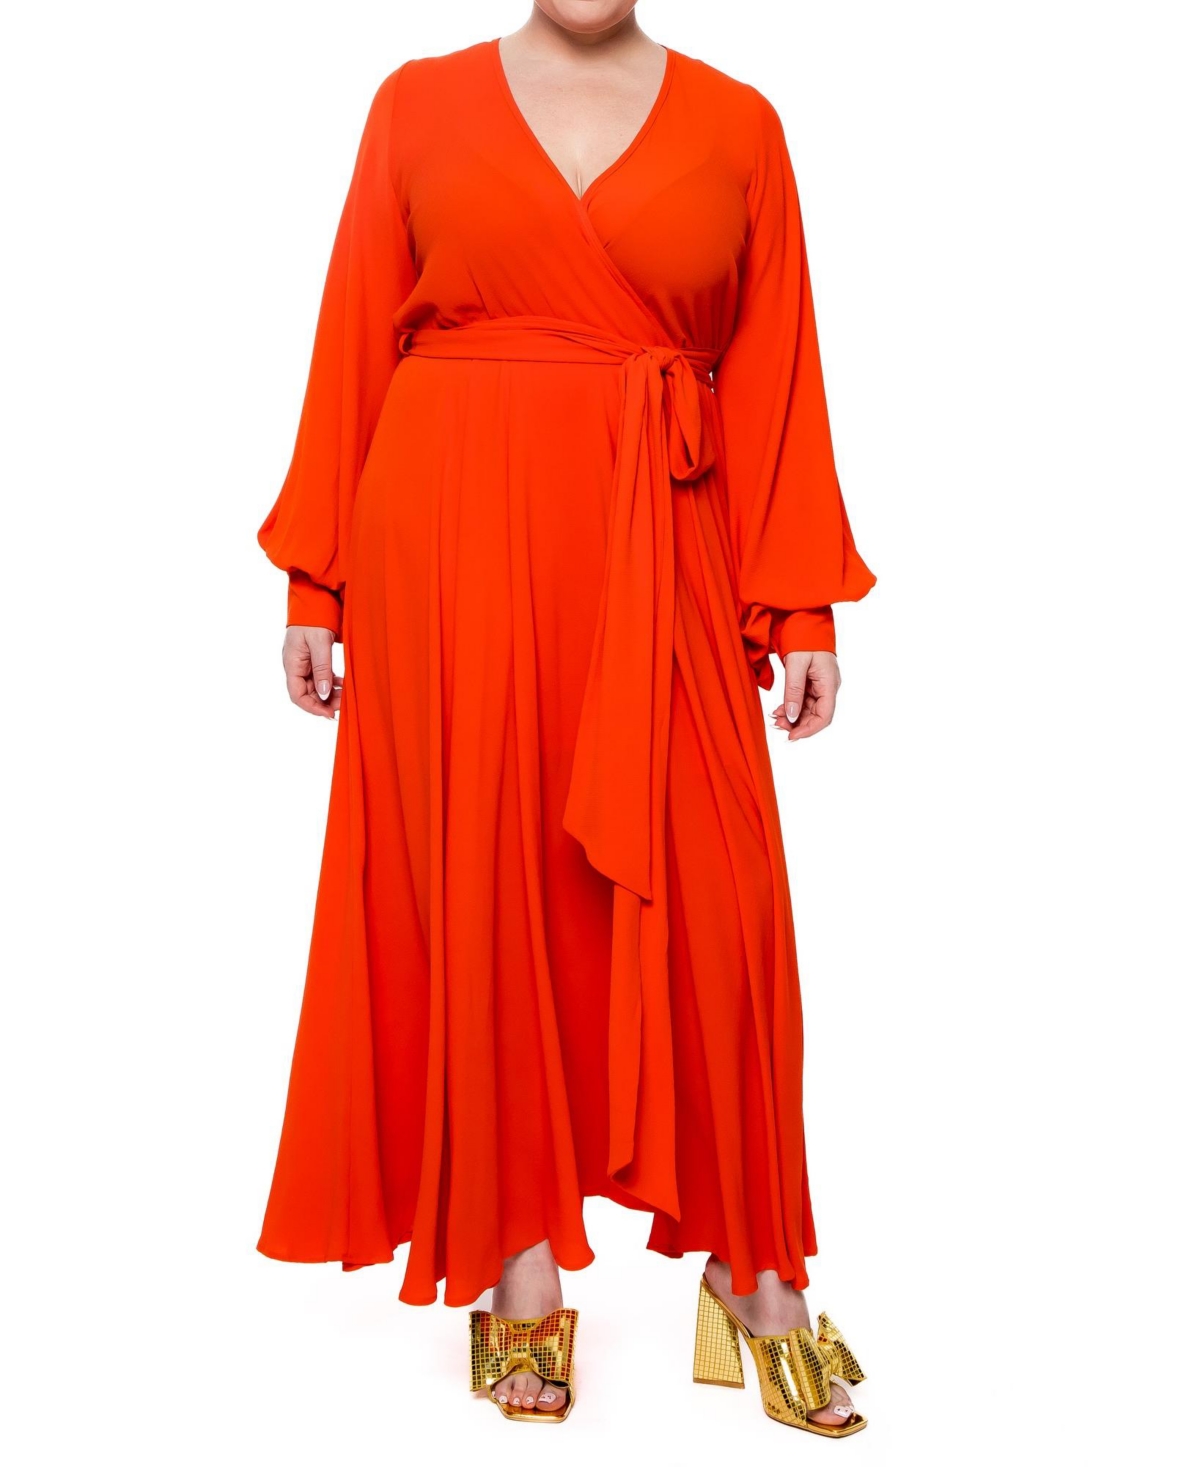 Women's Lily Pad Maxi Dress - Flame